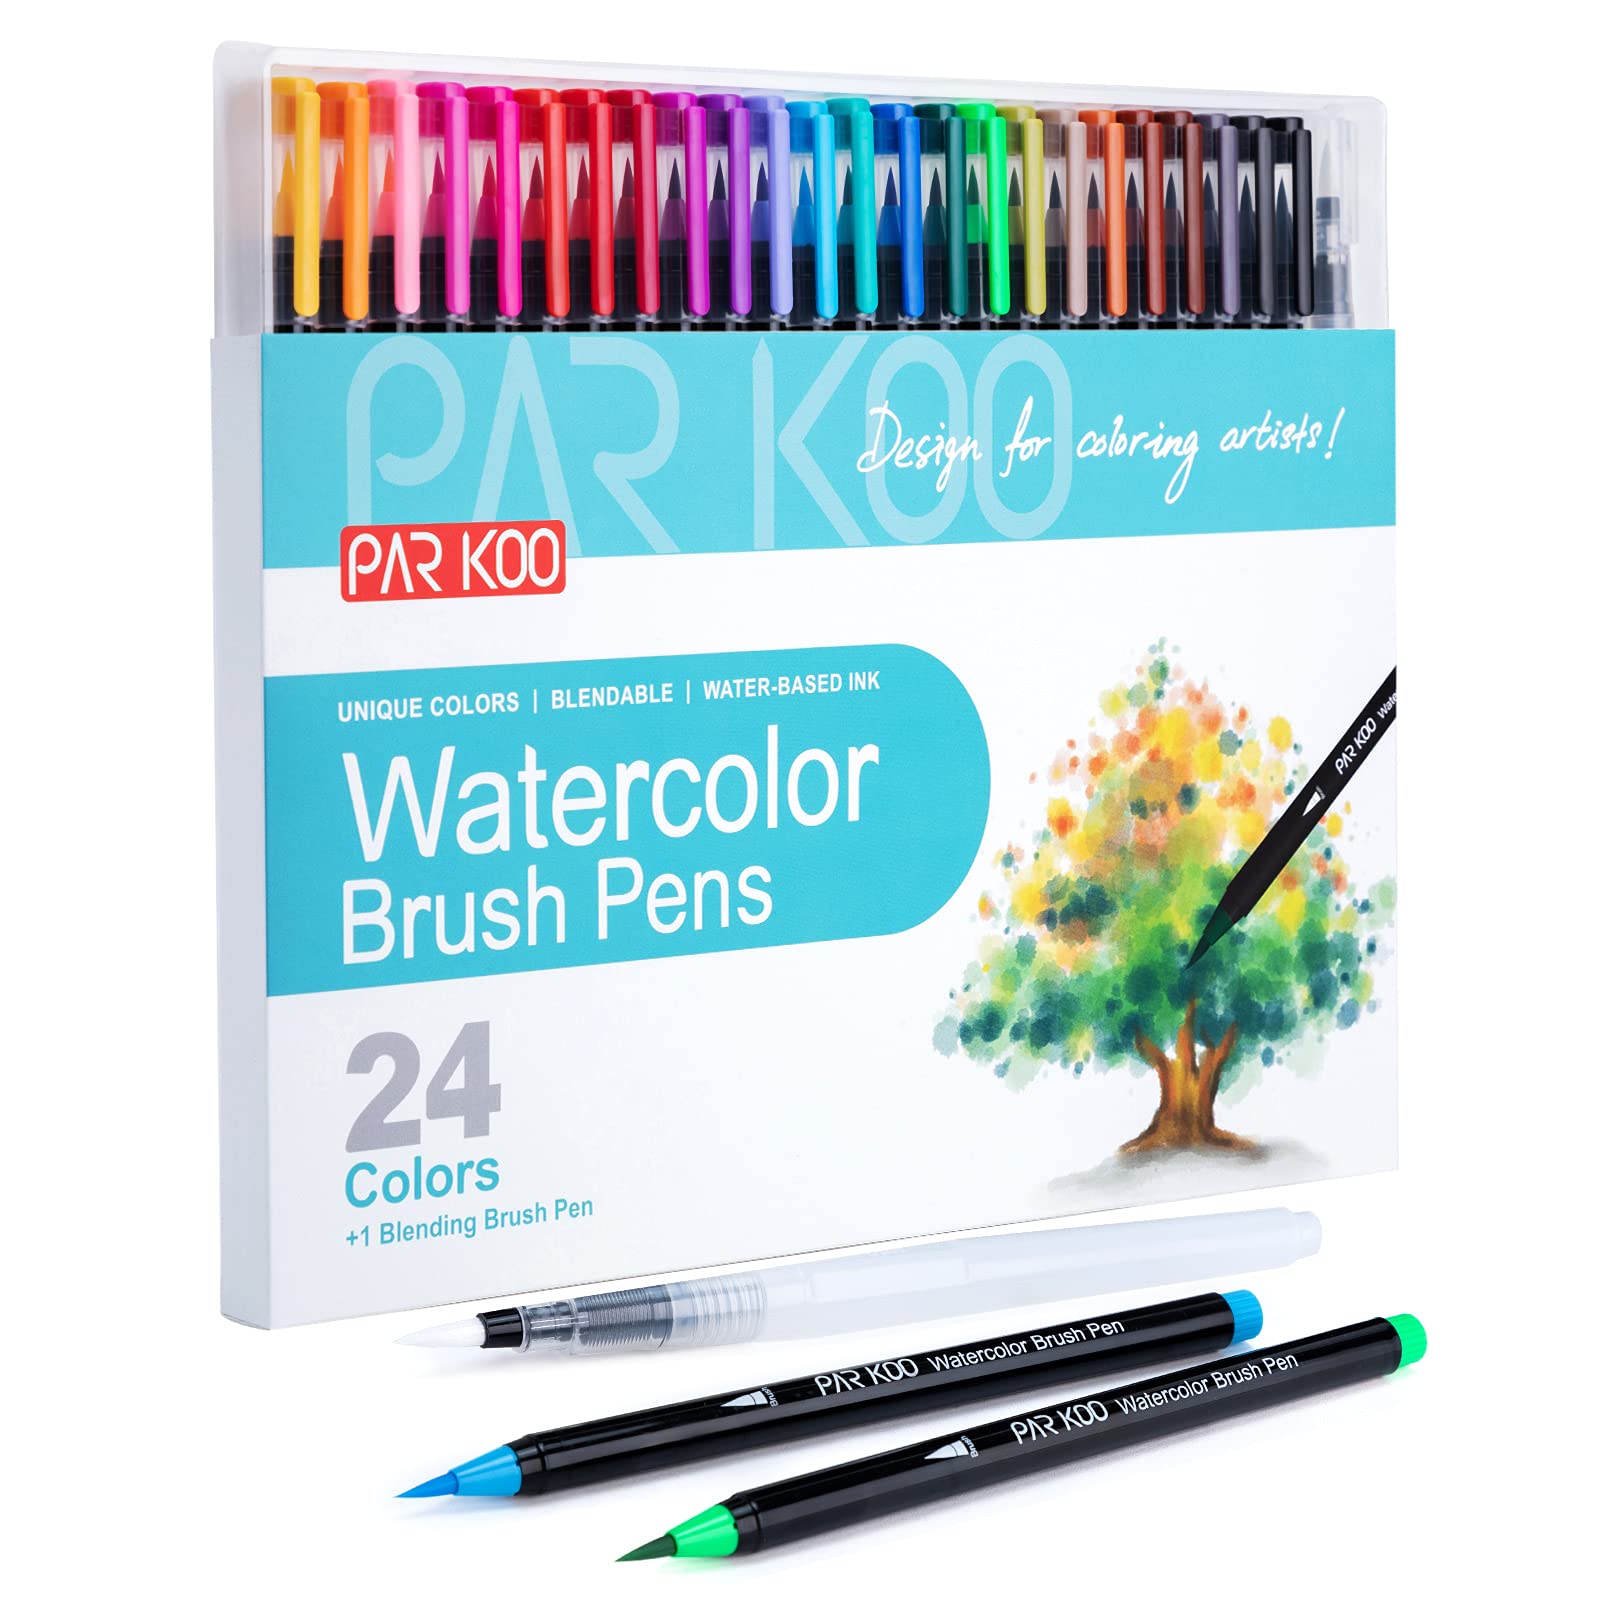 ParKoo 20 Colors Retractable Erasable Gel Pens 0.7 mm, No Need for Whi